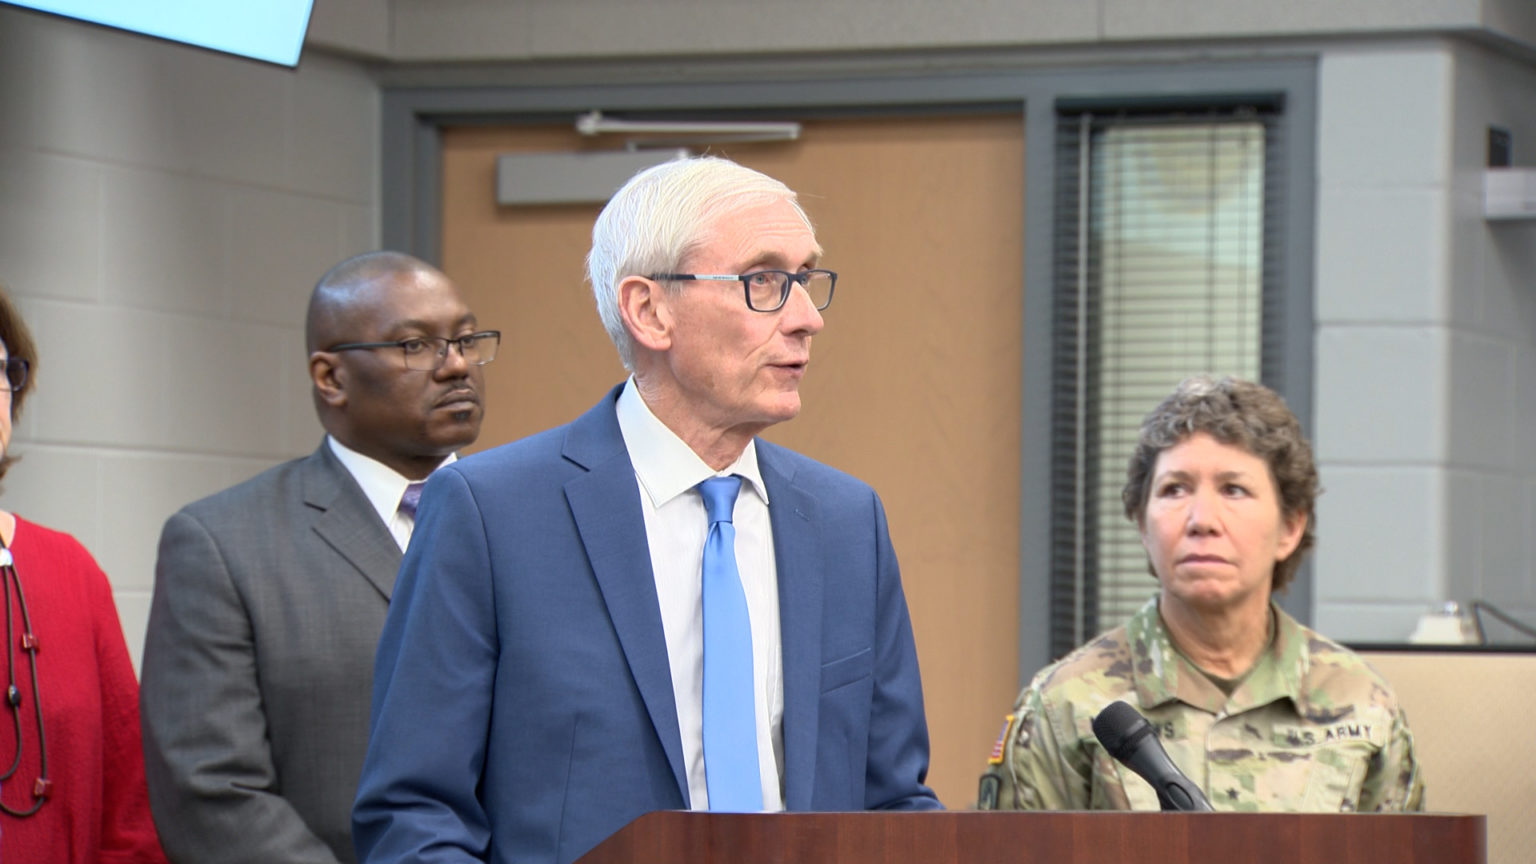 Tony Evers - Governor of Wisconsin stands at a podium at a press conference